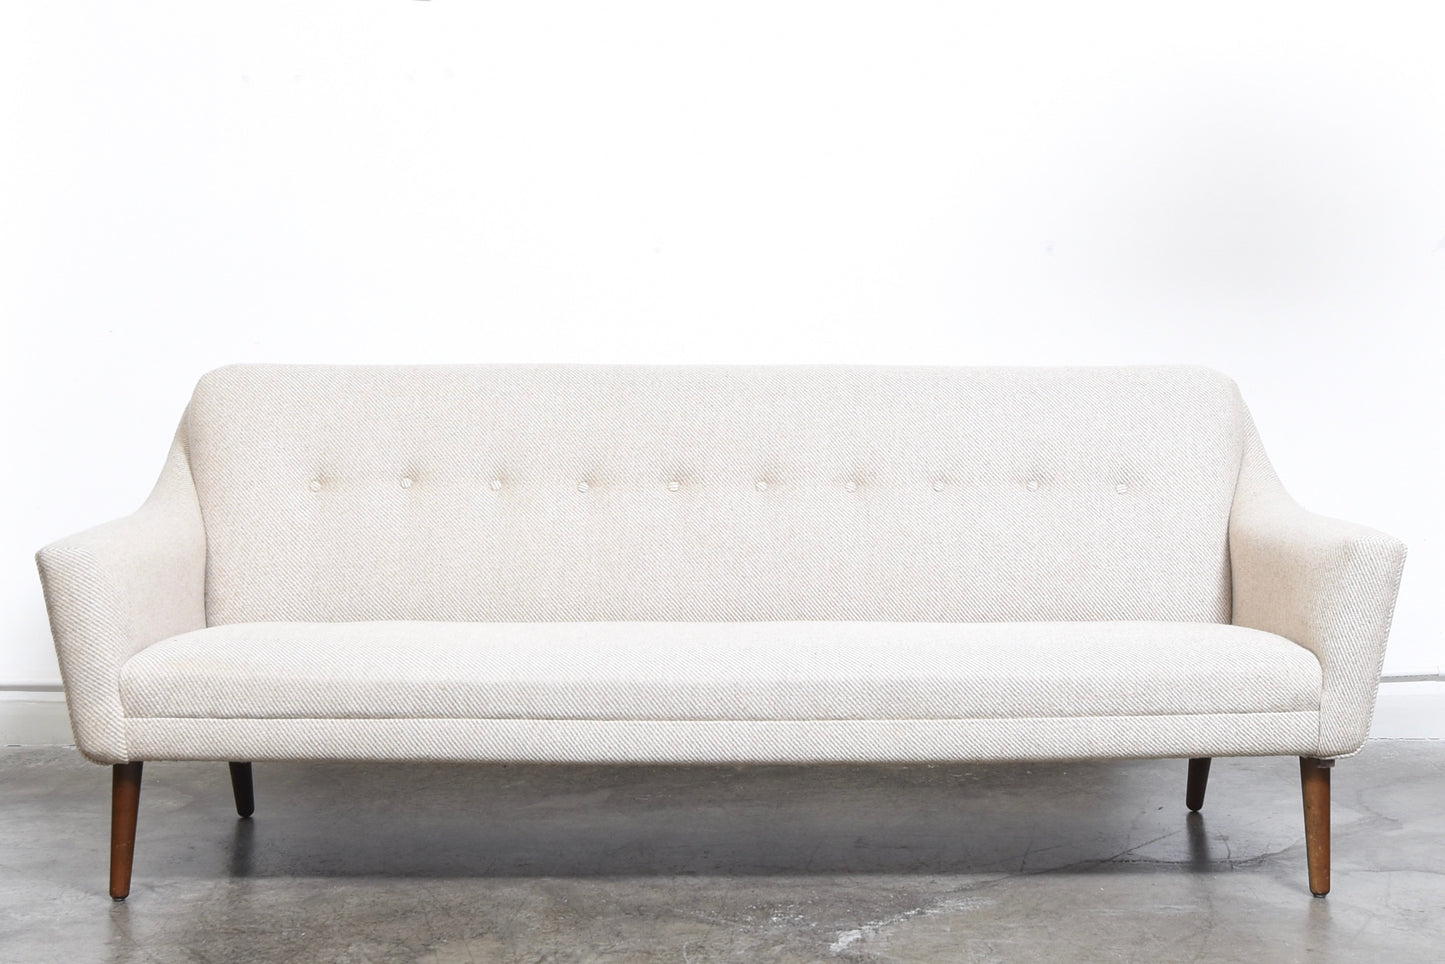 1960s three seat sofa with wool upholstery